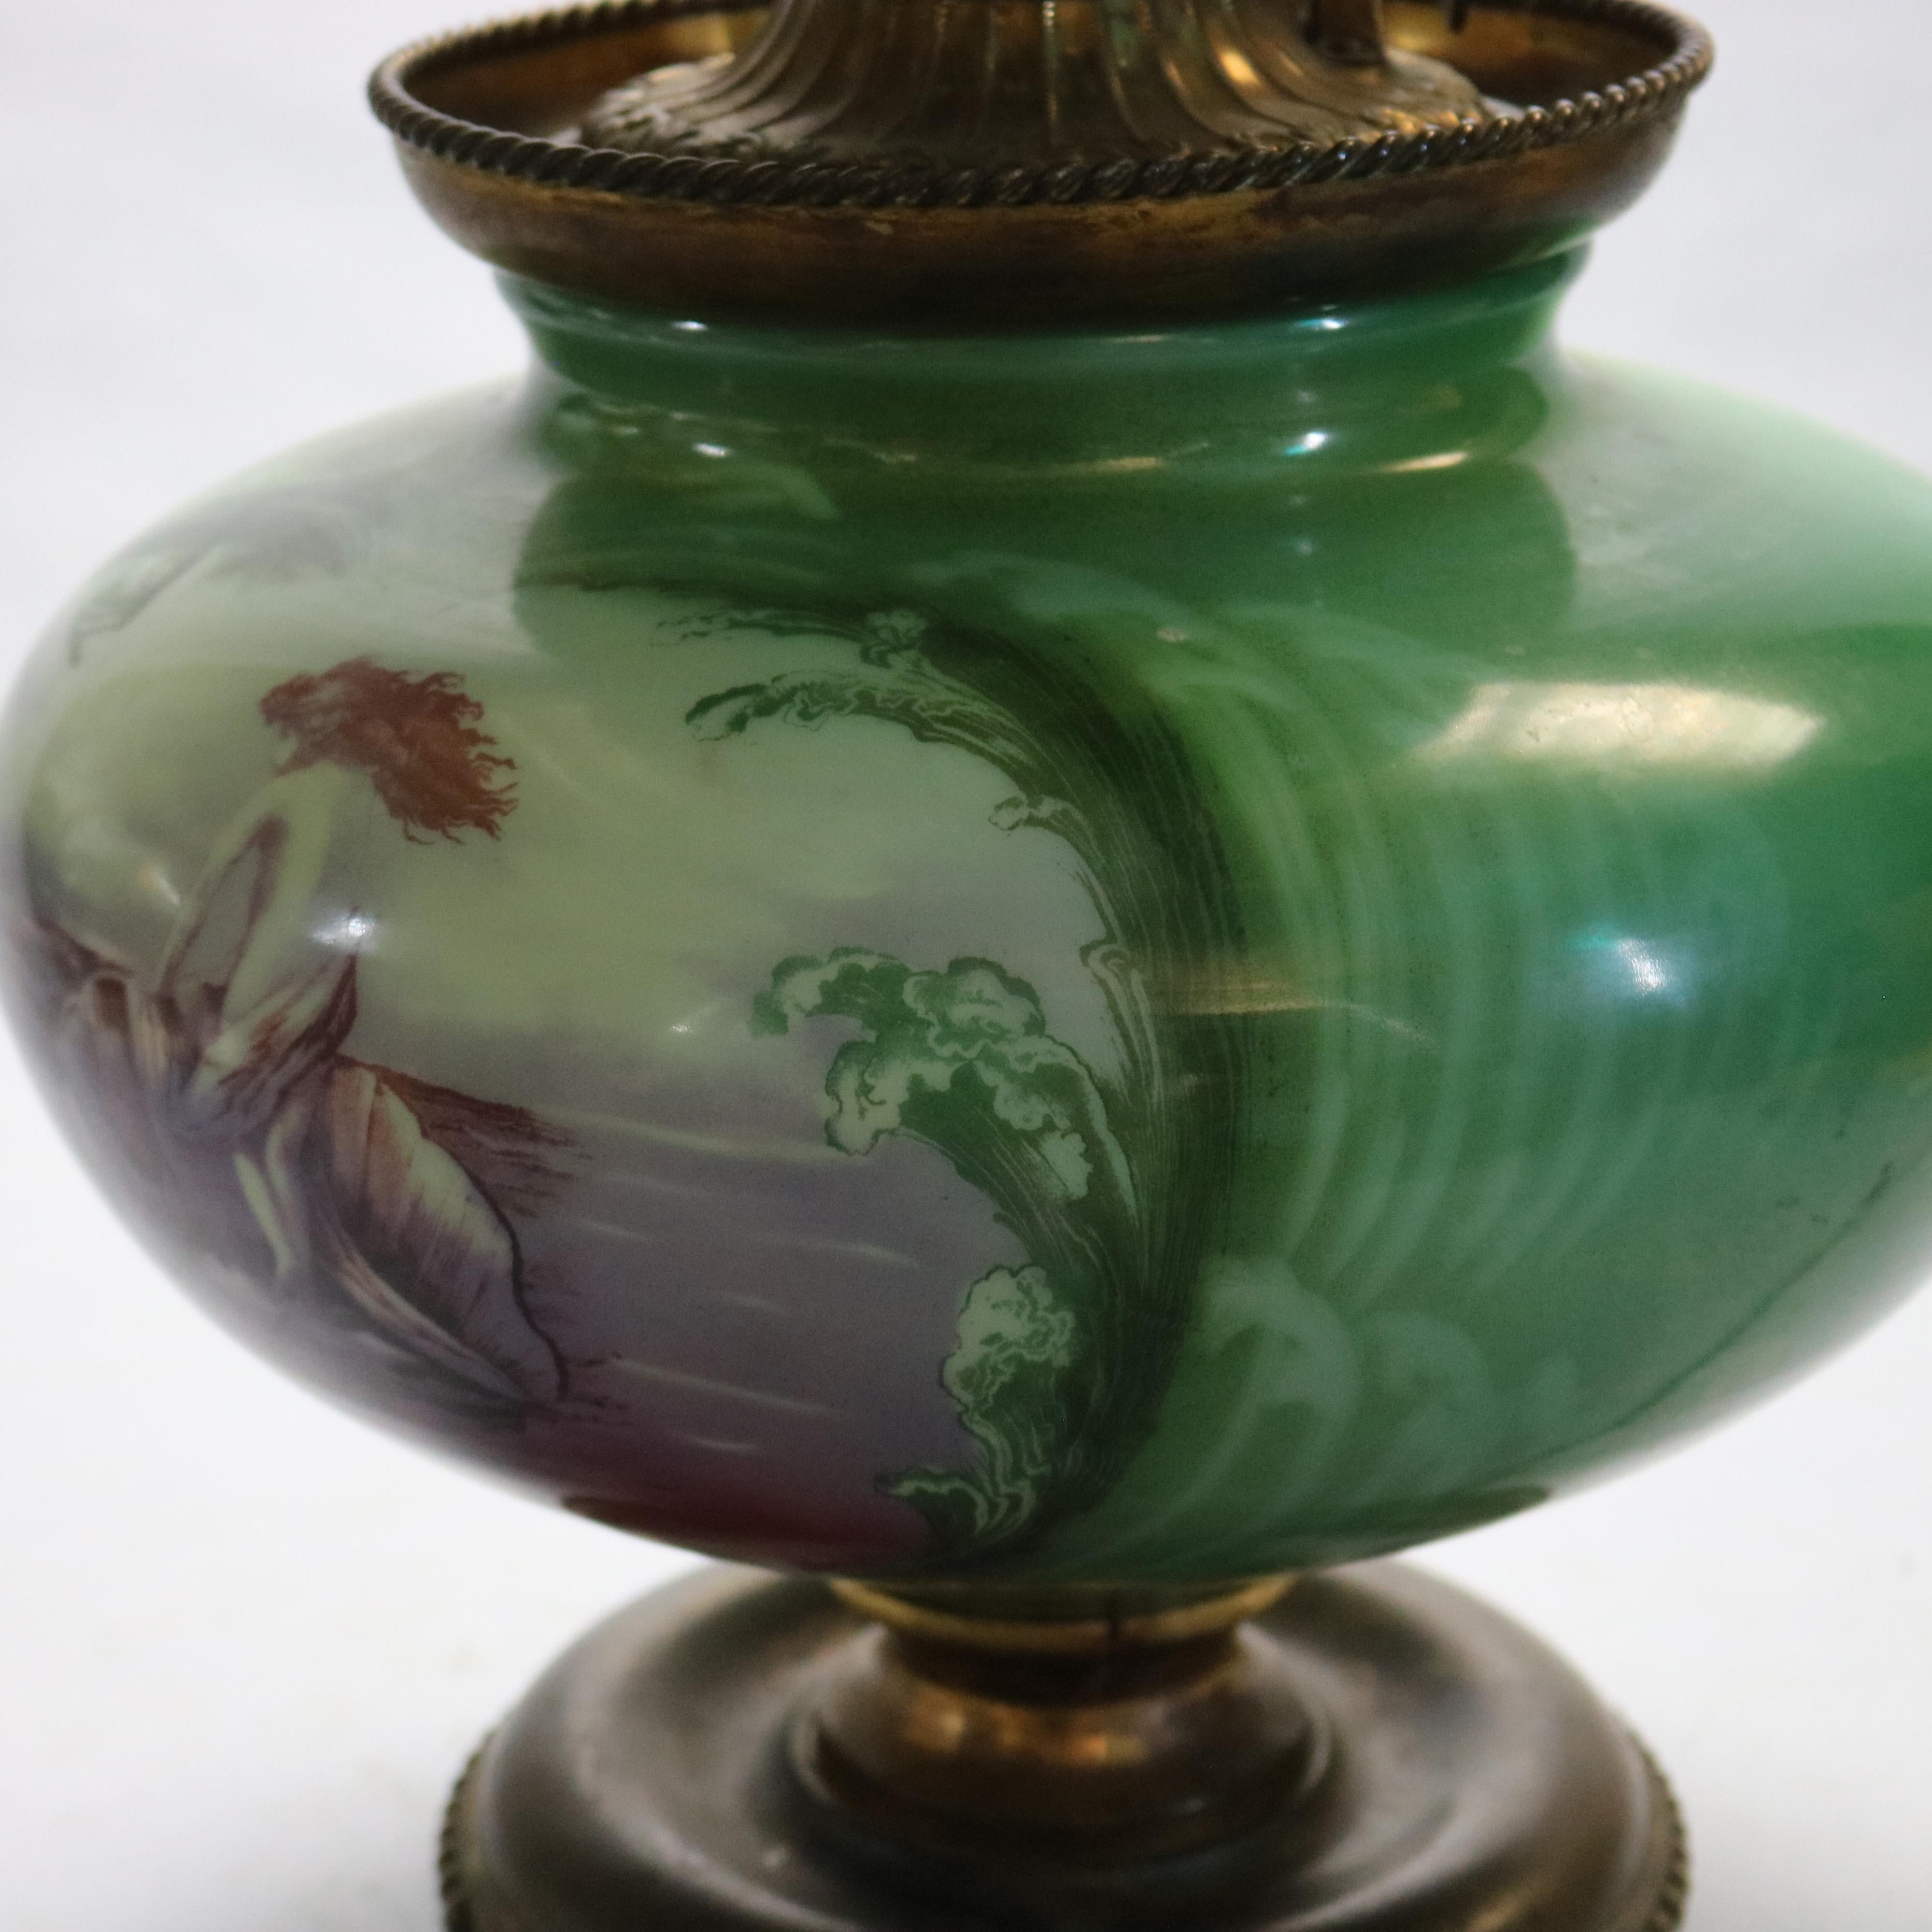 19th Century Antique Oversized Gone with the Wind Lamp, Hand-Painted Scenic with Mermaid